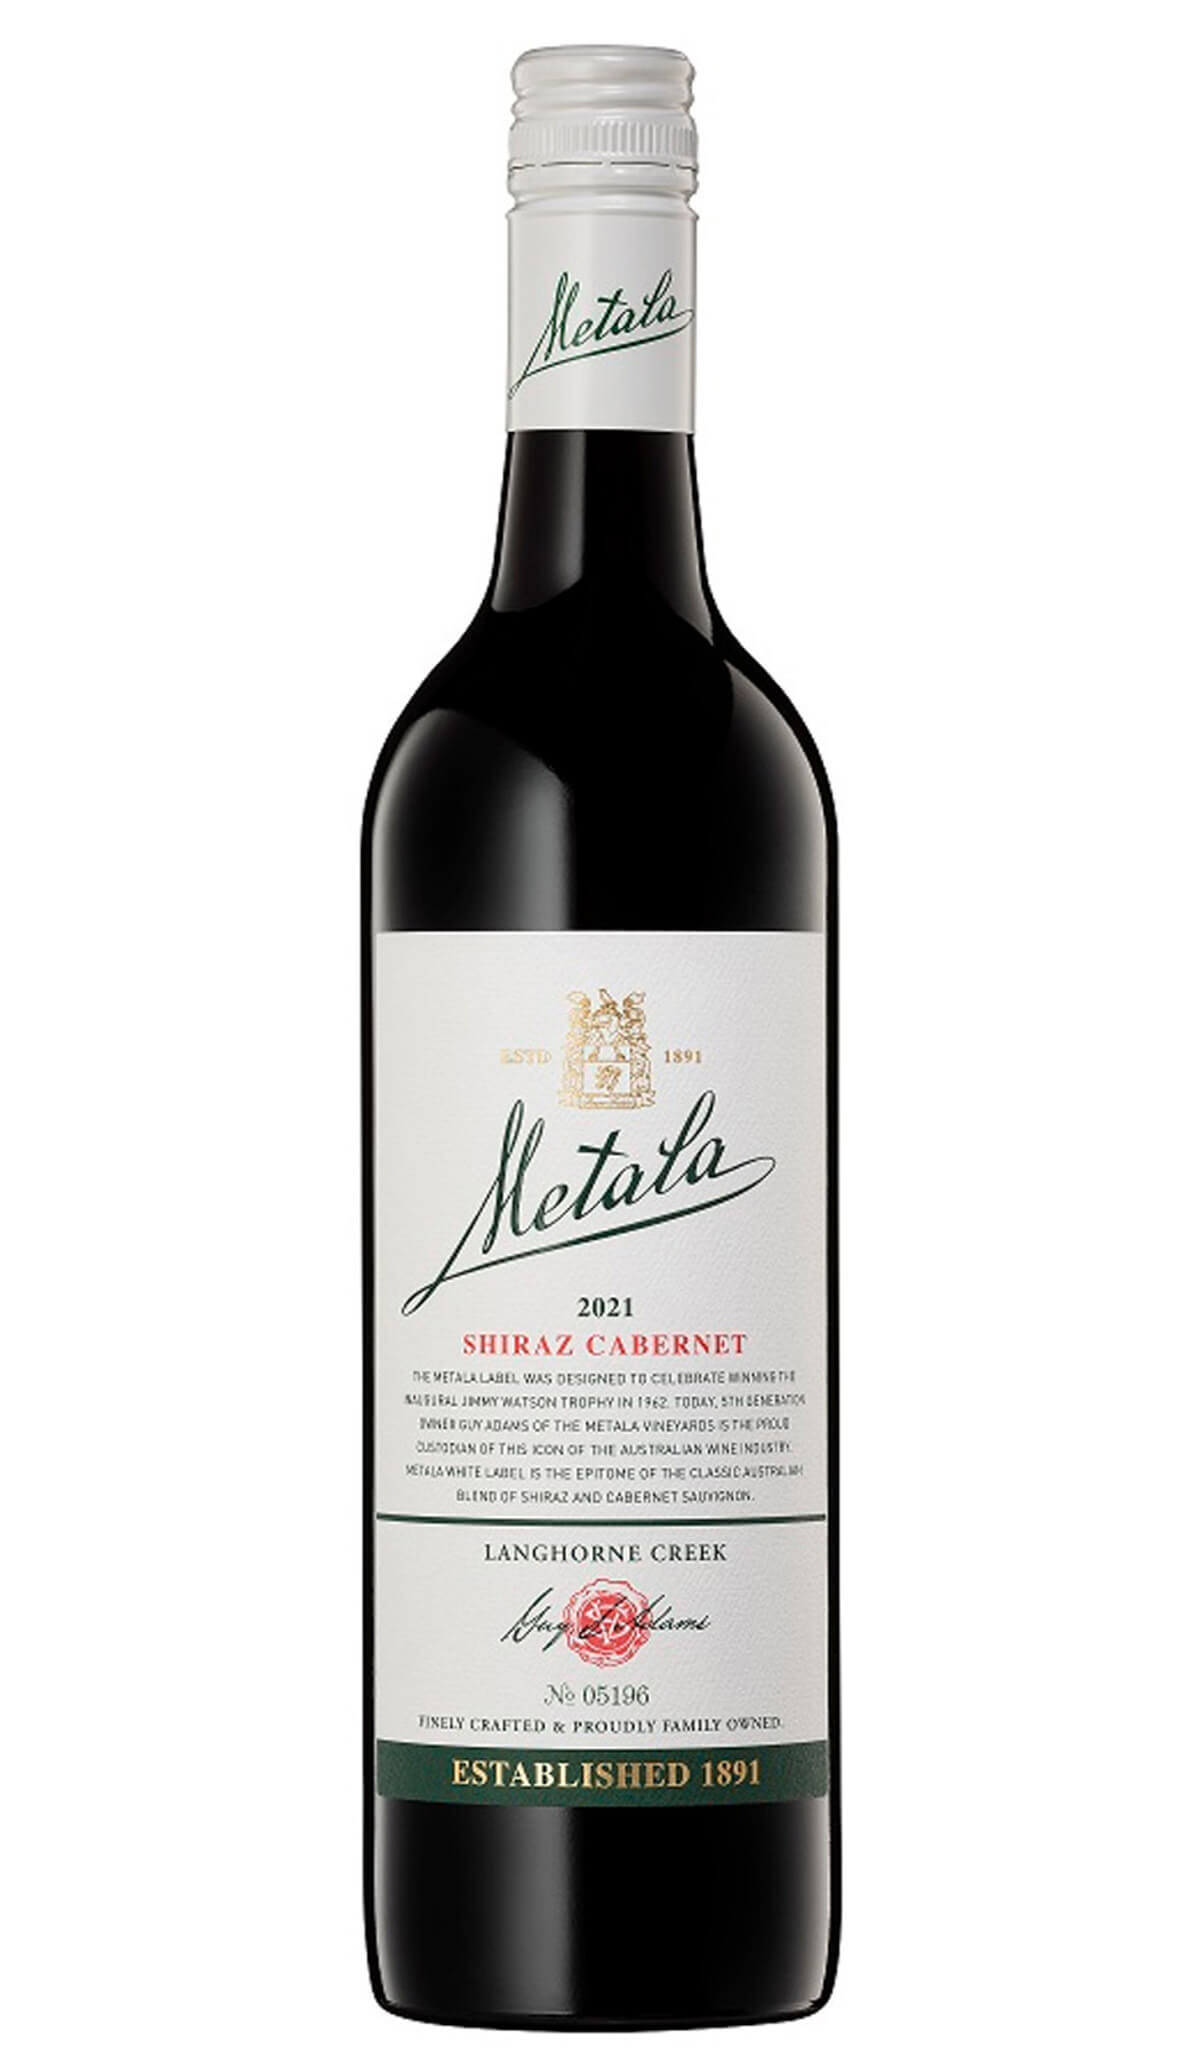 Find out more, explore the range and purchase Metala White Label Shiraz Cabernet 2021 (Langhorne Creek) available online at Wine Sellers Direct - Australia's independent liquor specialists.